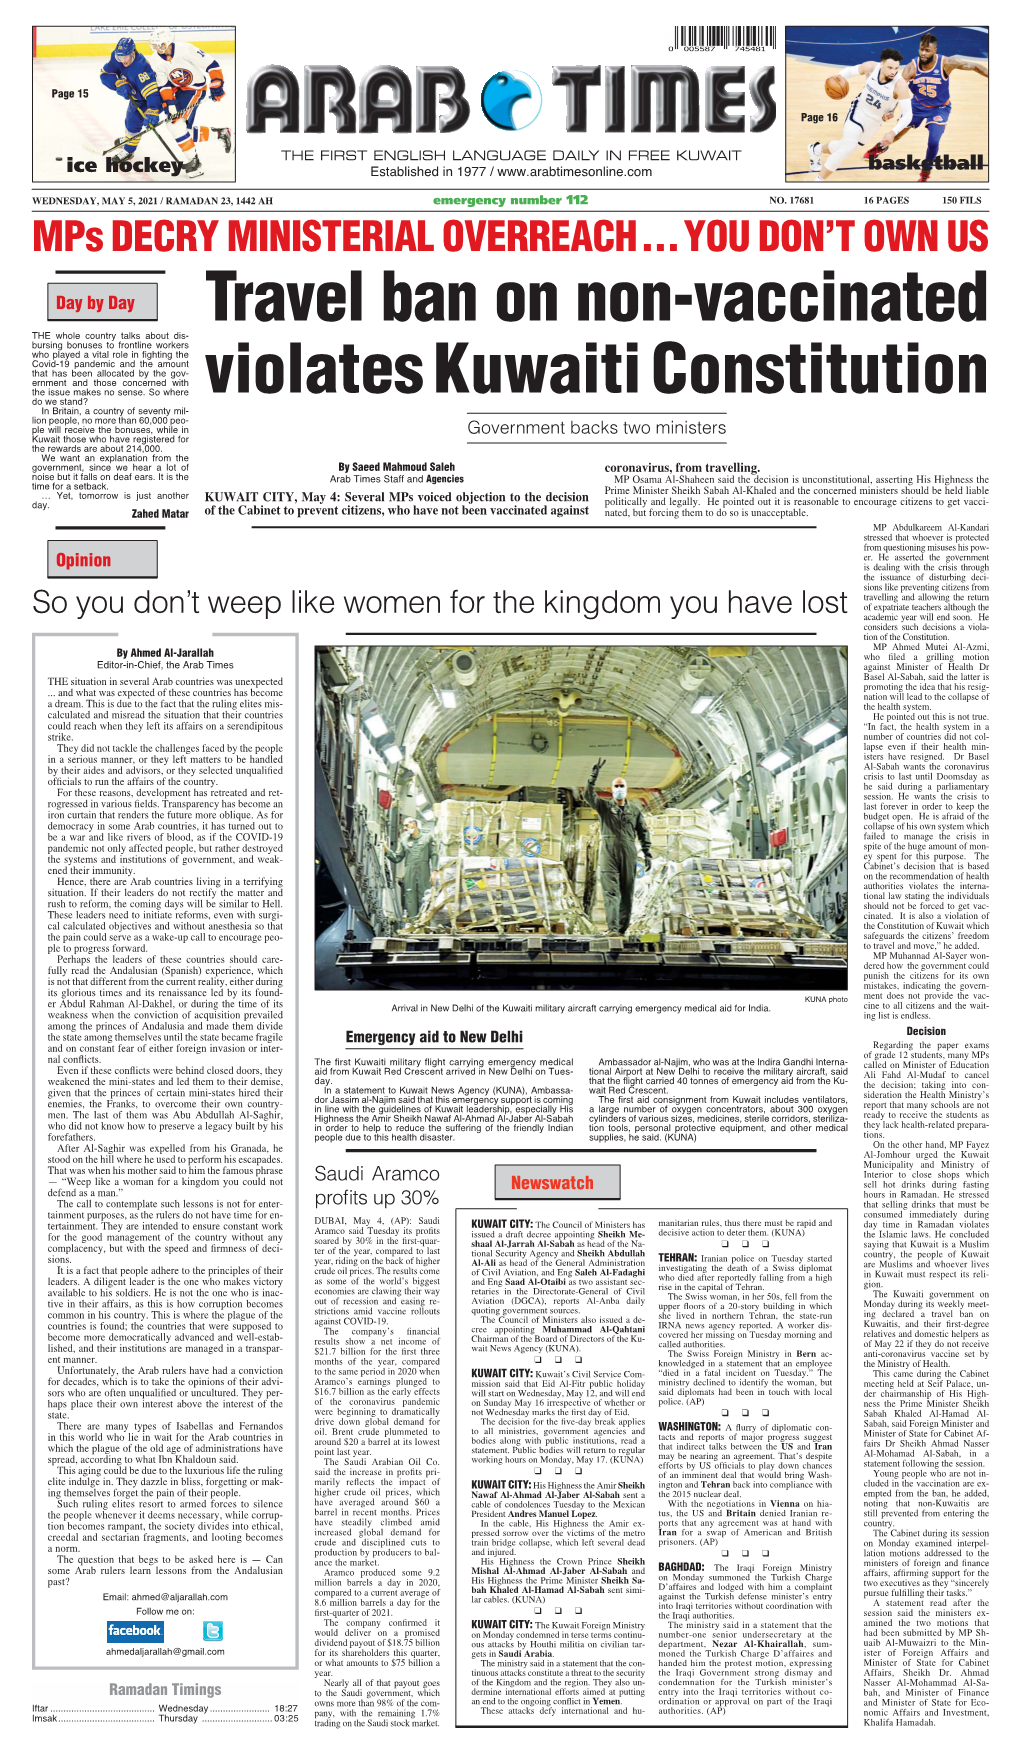 Travel Ban on Non-Vaccinated Violates Kuwaiti Constitution